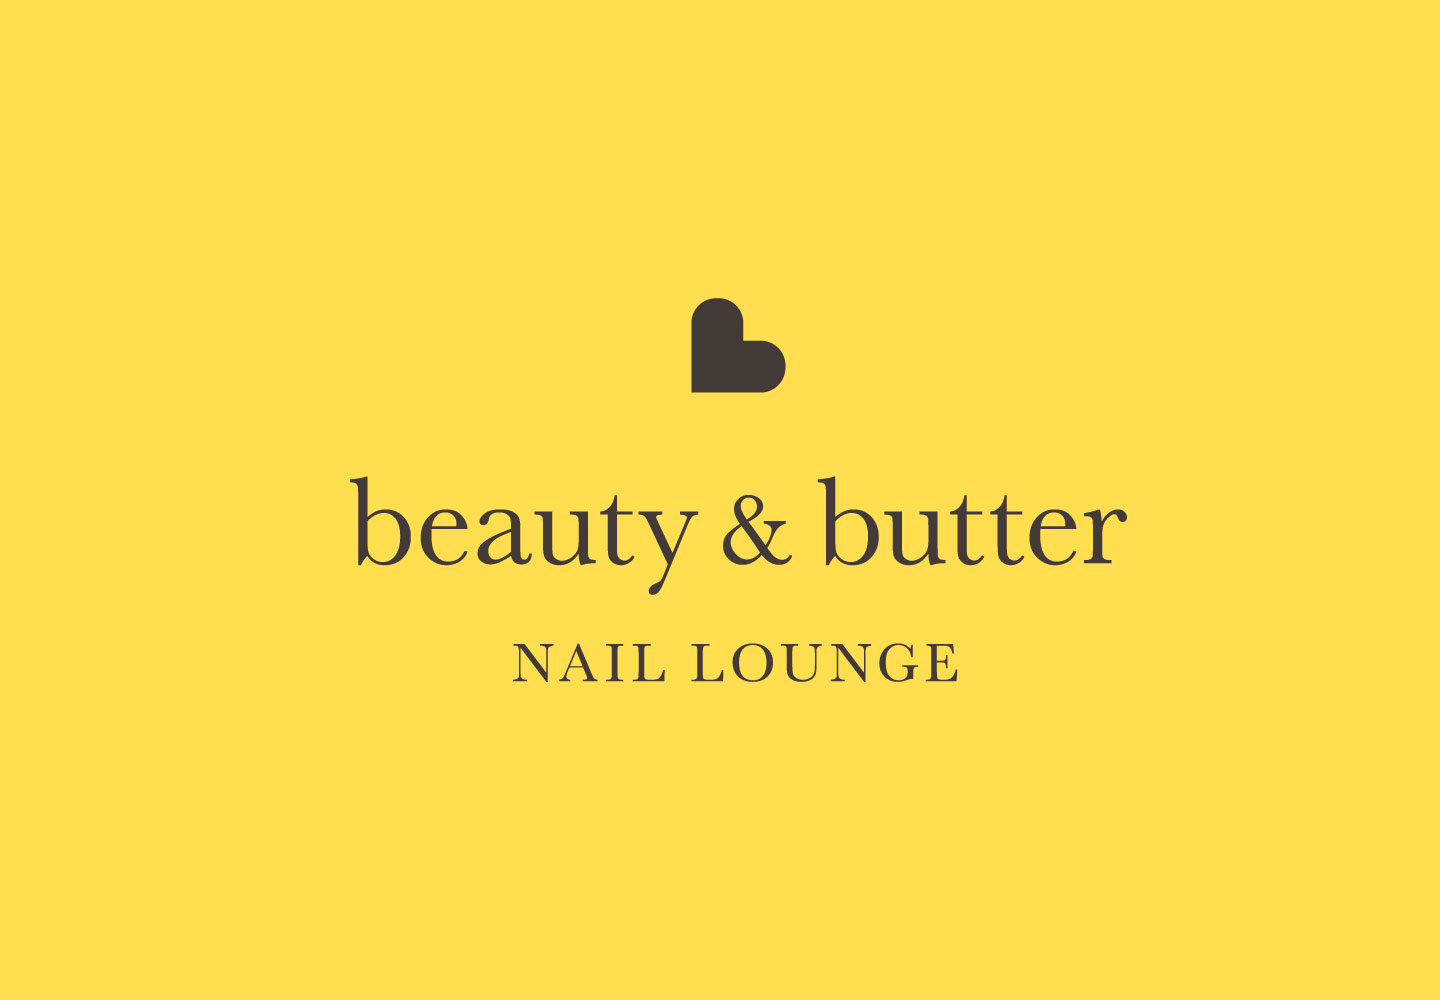 Brand Consultancy in Lifestyle Industry. Logo design for Beauty & Butter